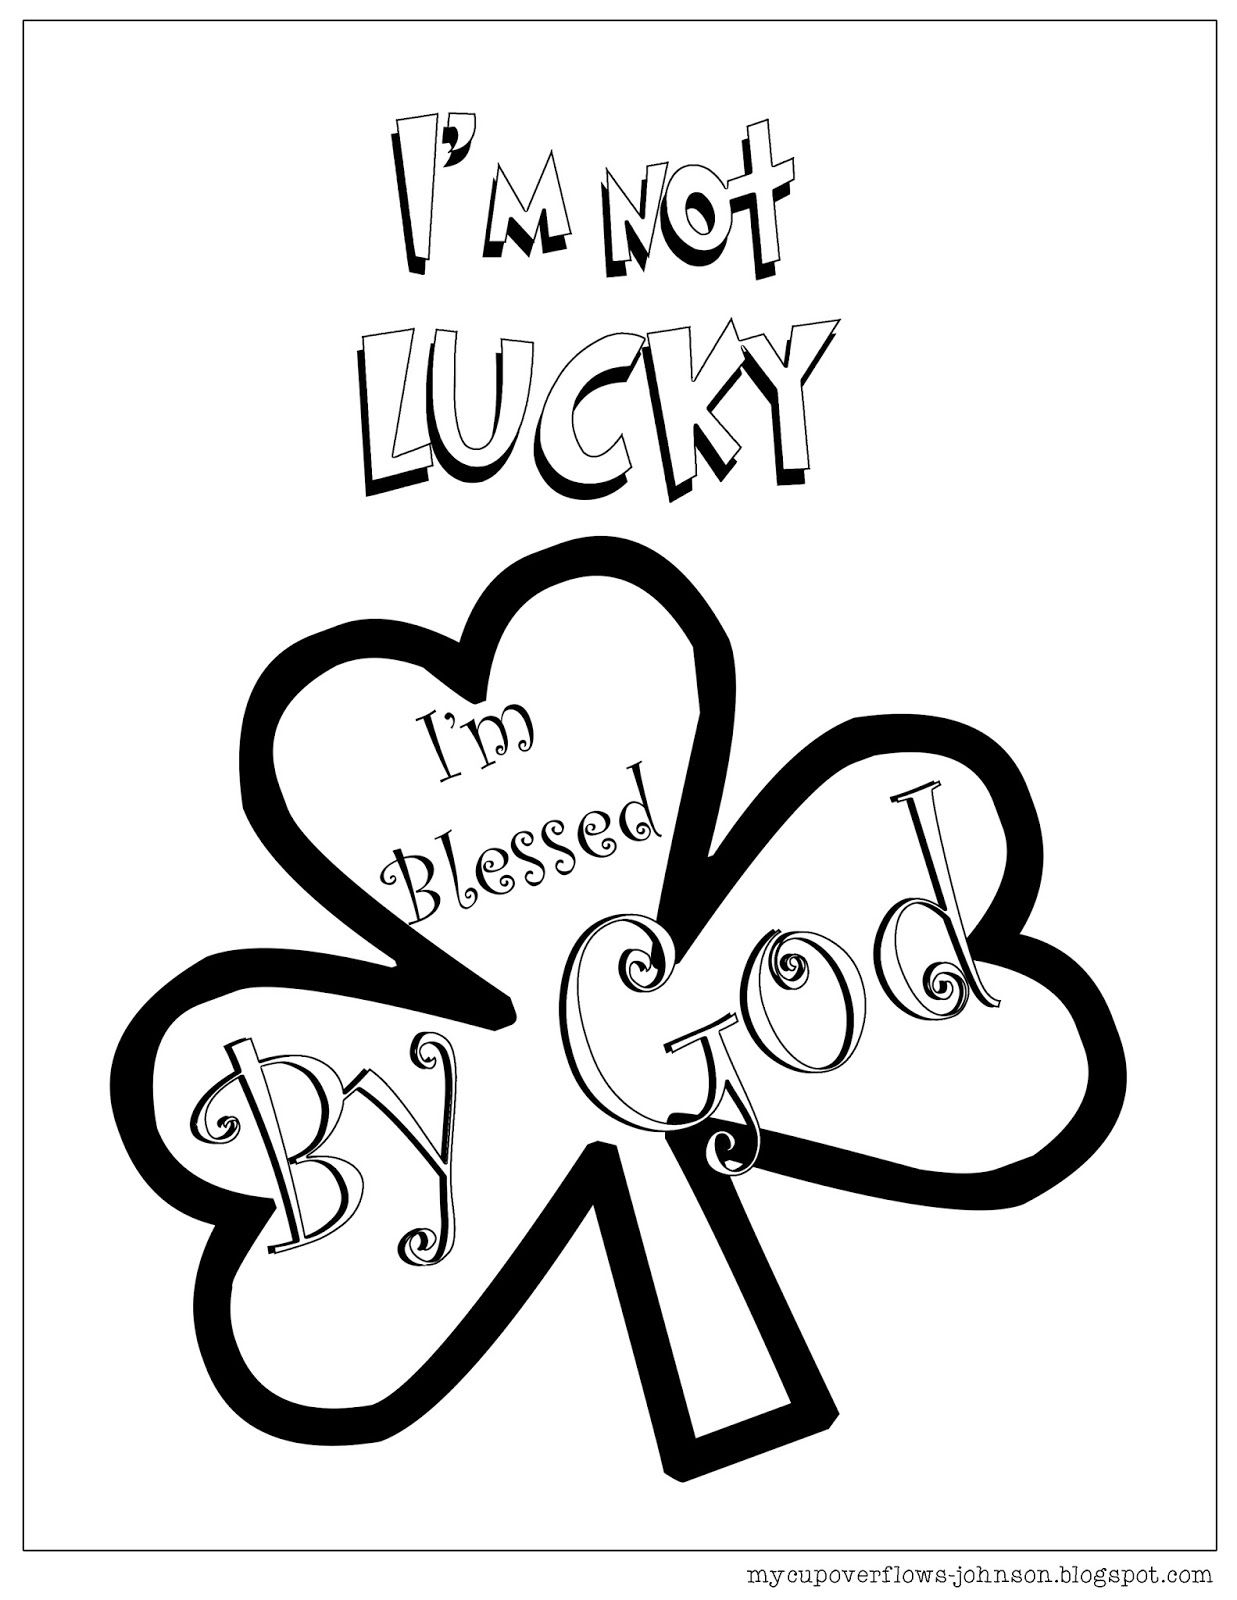 St patricks day coloring pages sunday school coloring pages st patricks sunday school st patricks coloring sheets